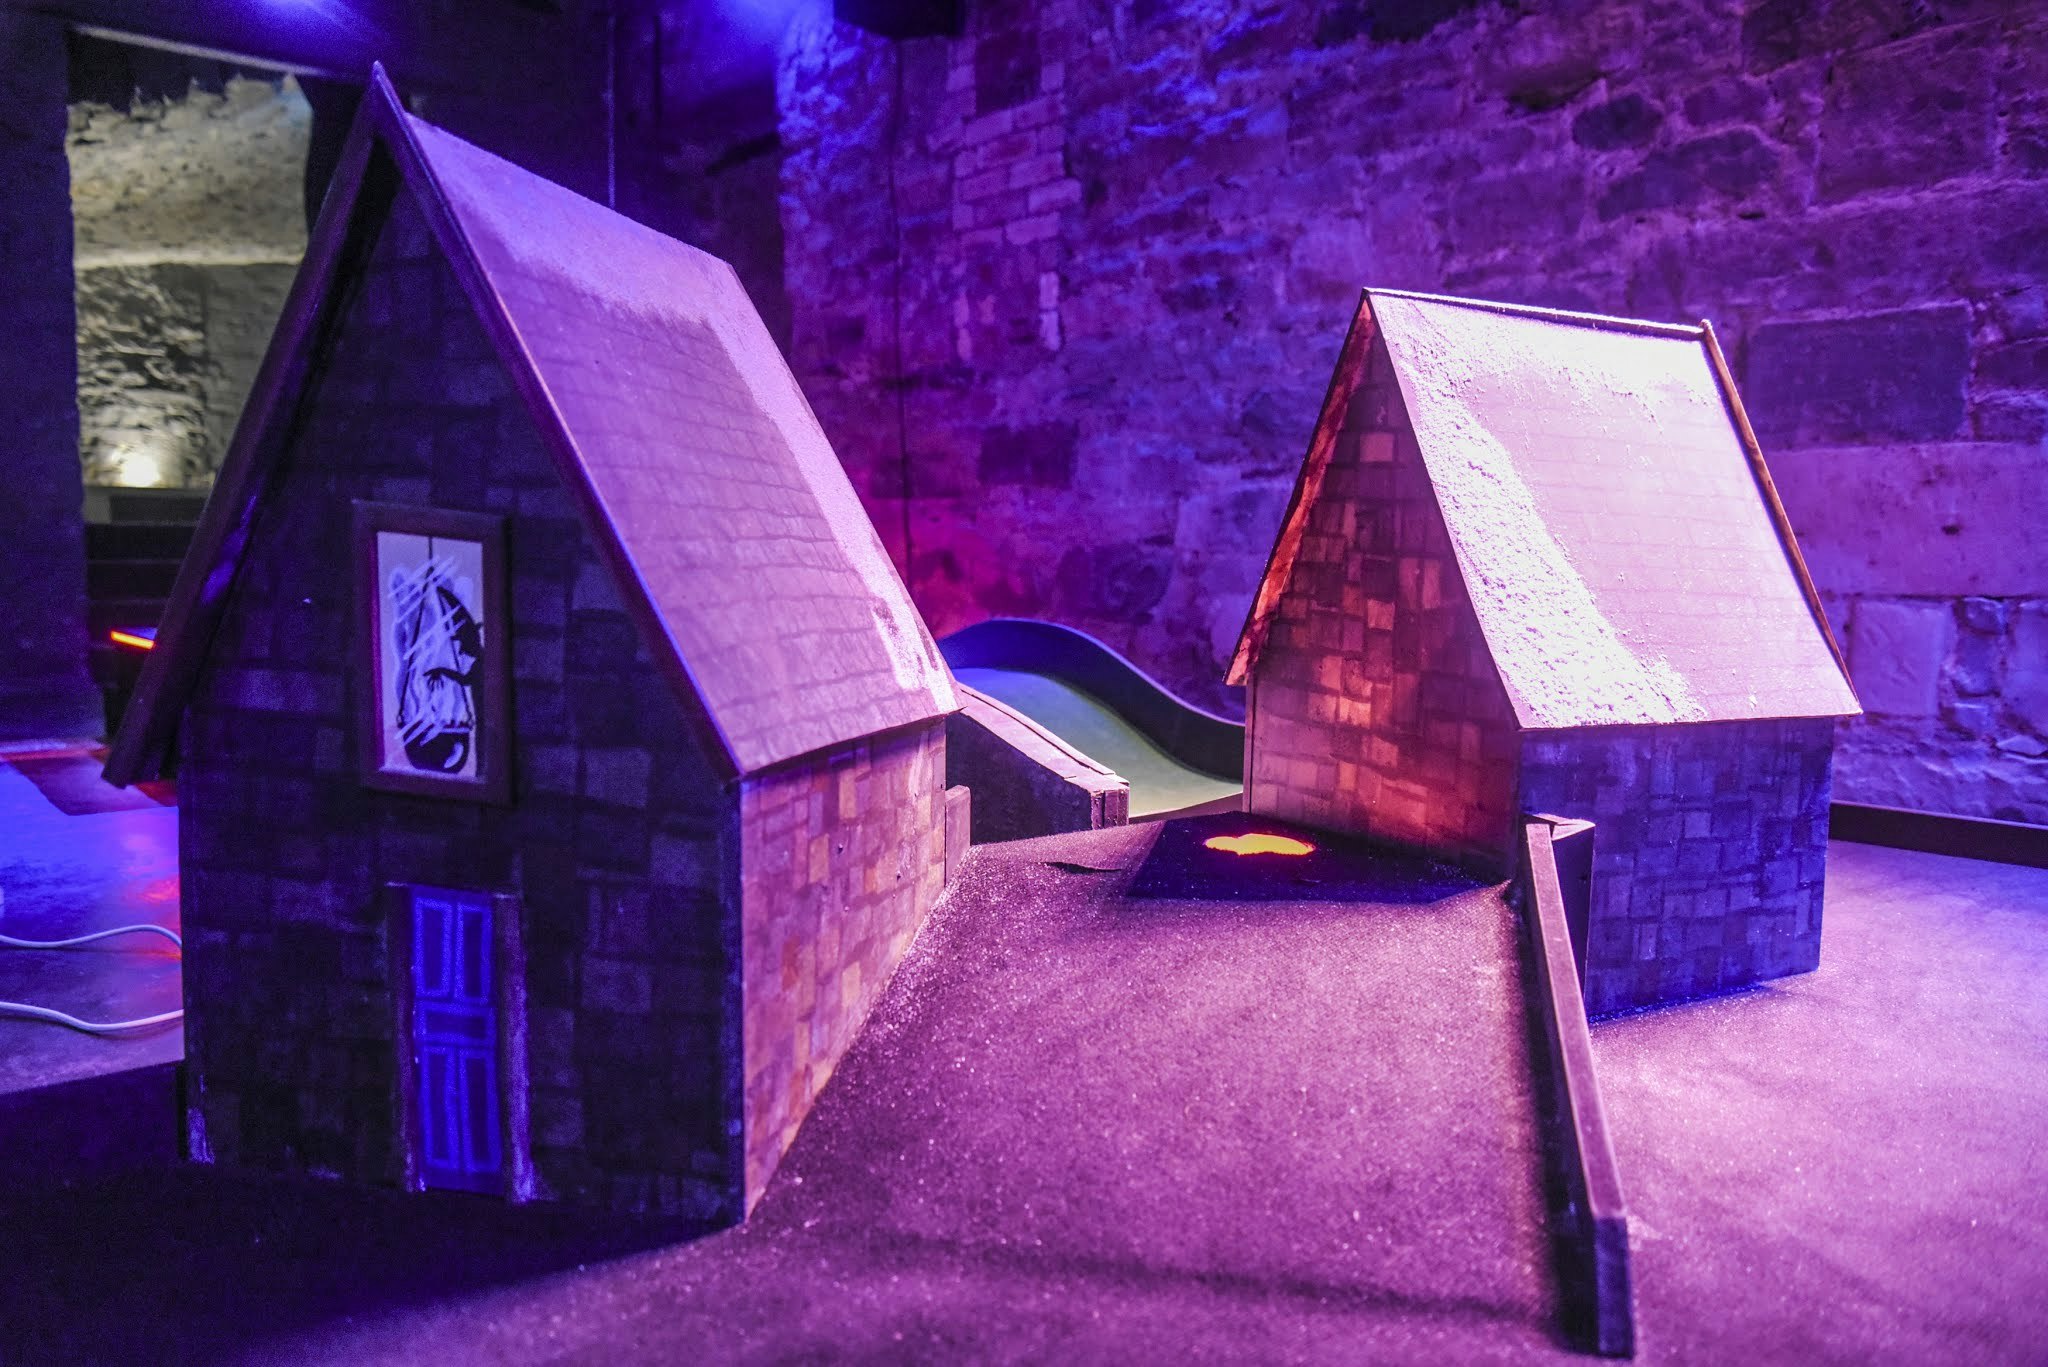 Two small model houses are part of the indoor mini golf course at Wizard Golf, in Edinburgh, Scotland. 